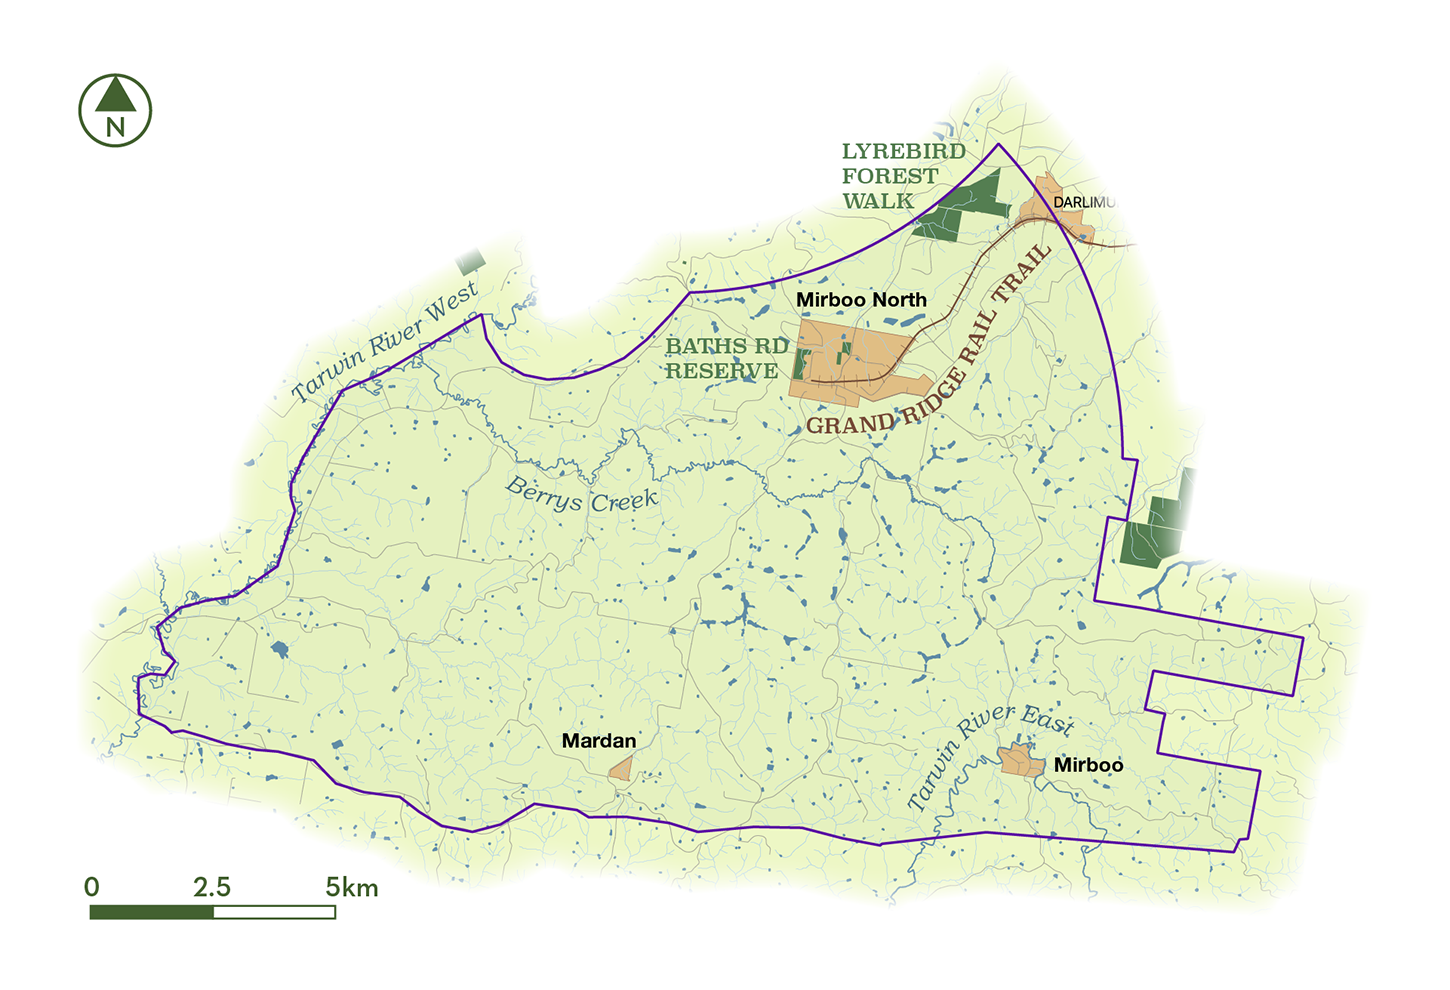 Image showing a map of the MMNLG catchment area with key local features and townships marked